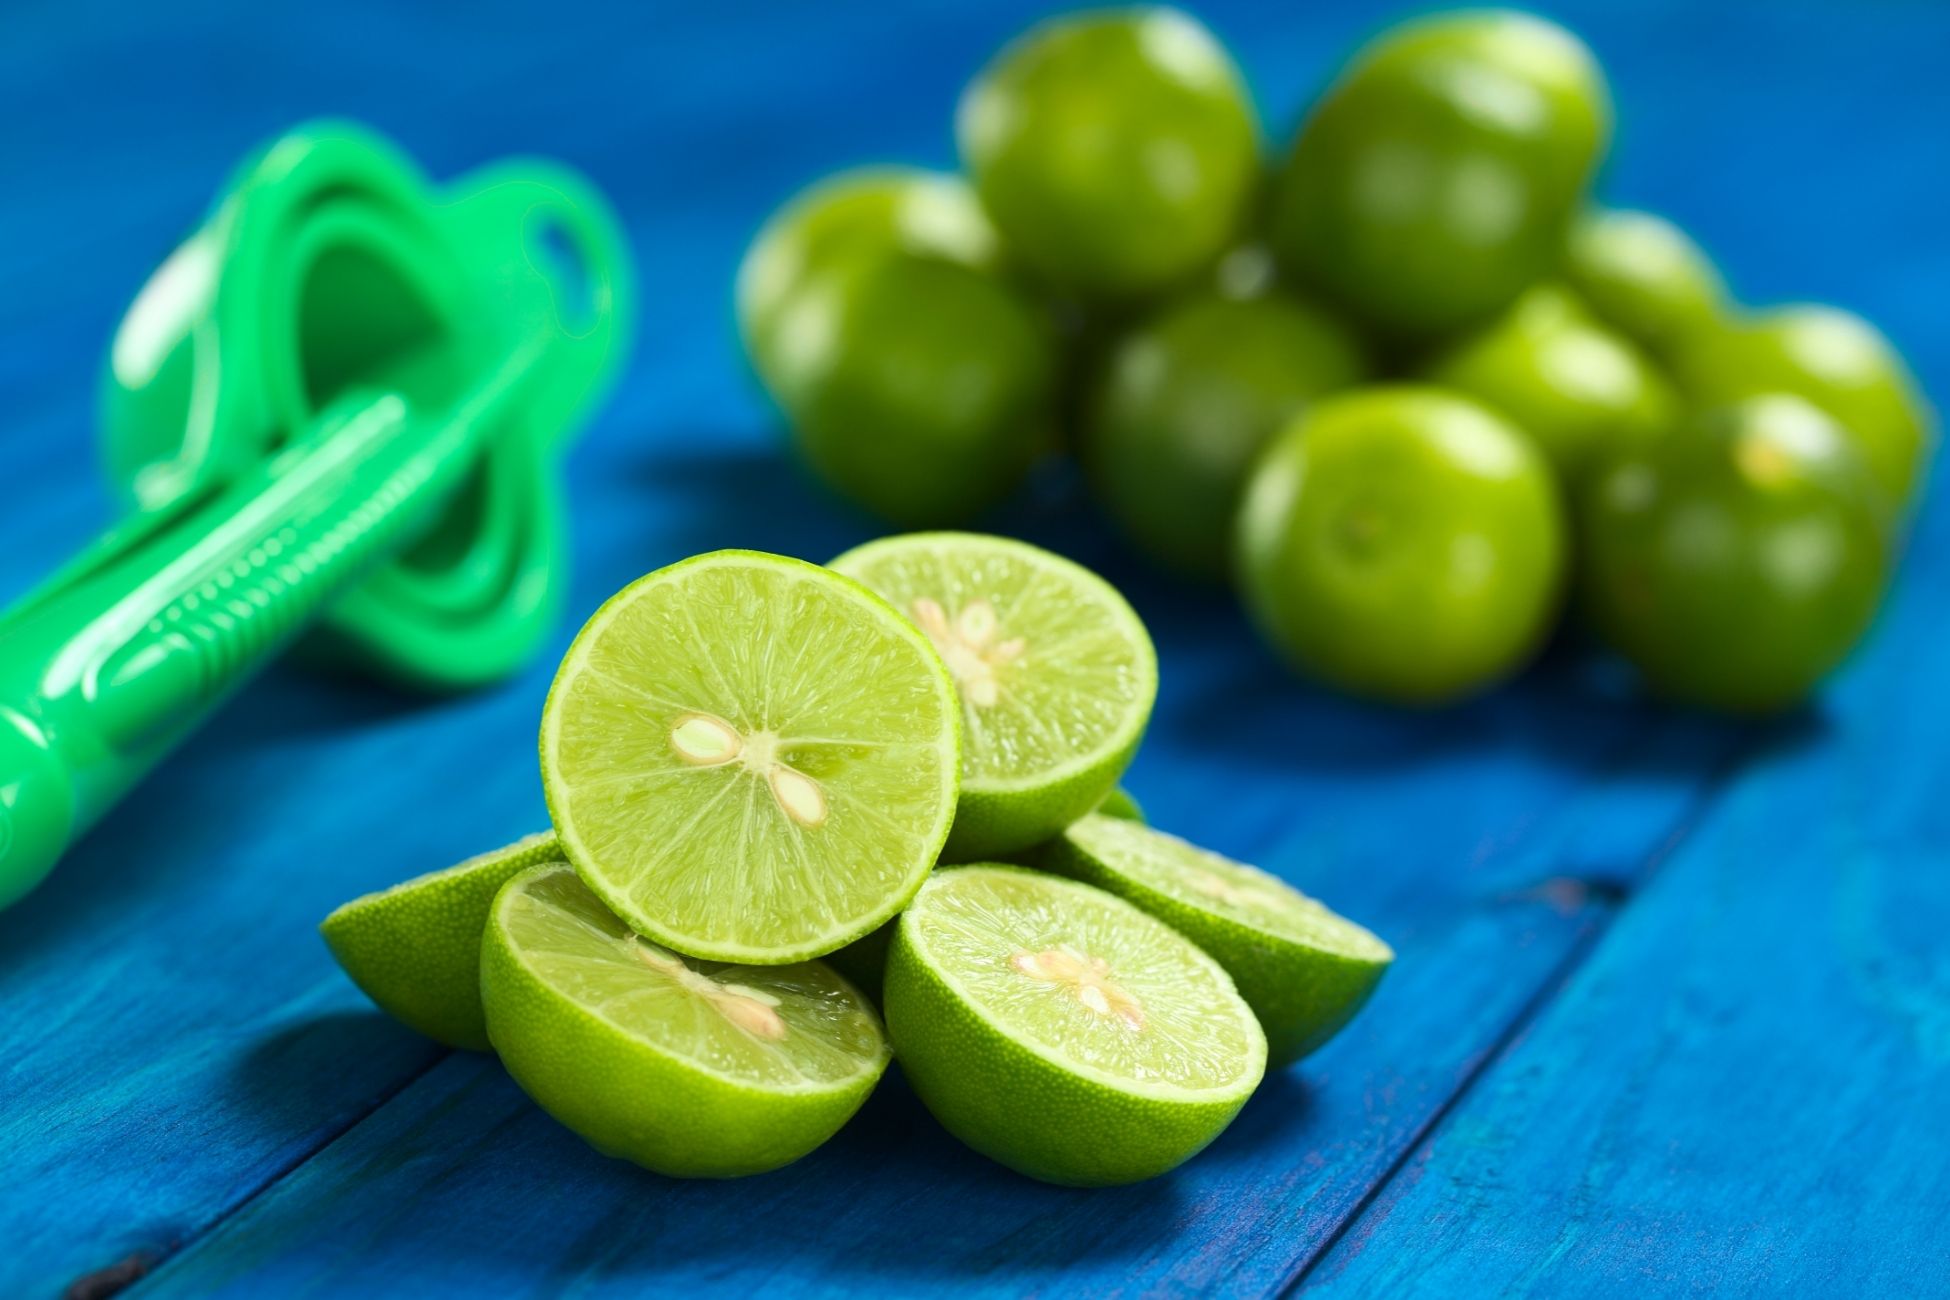 The Differences Between Key Lime and Limes